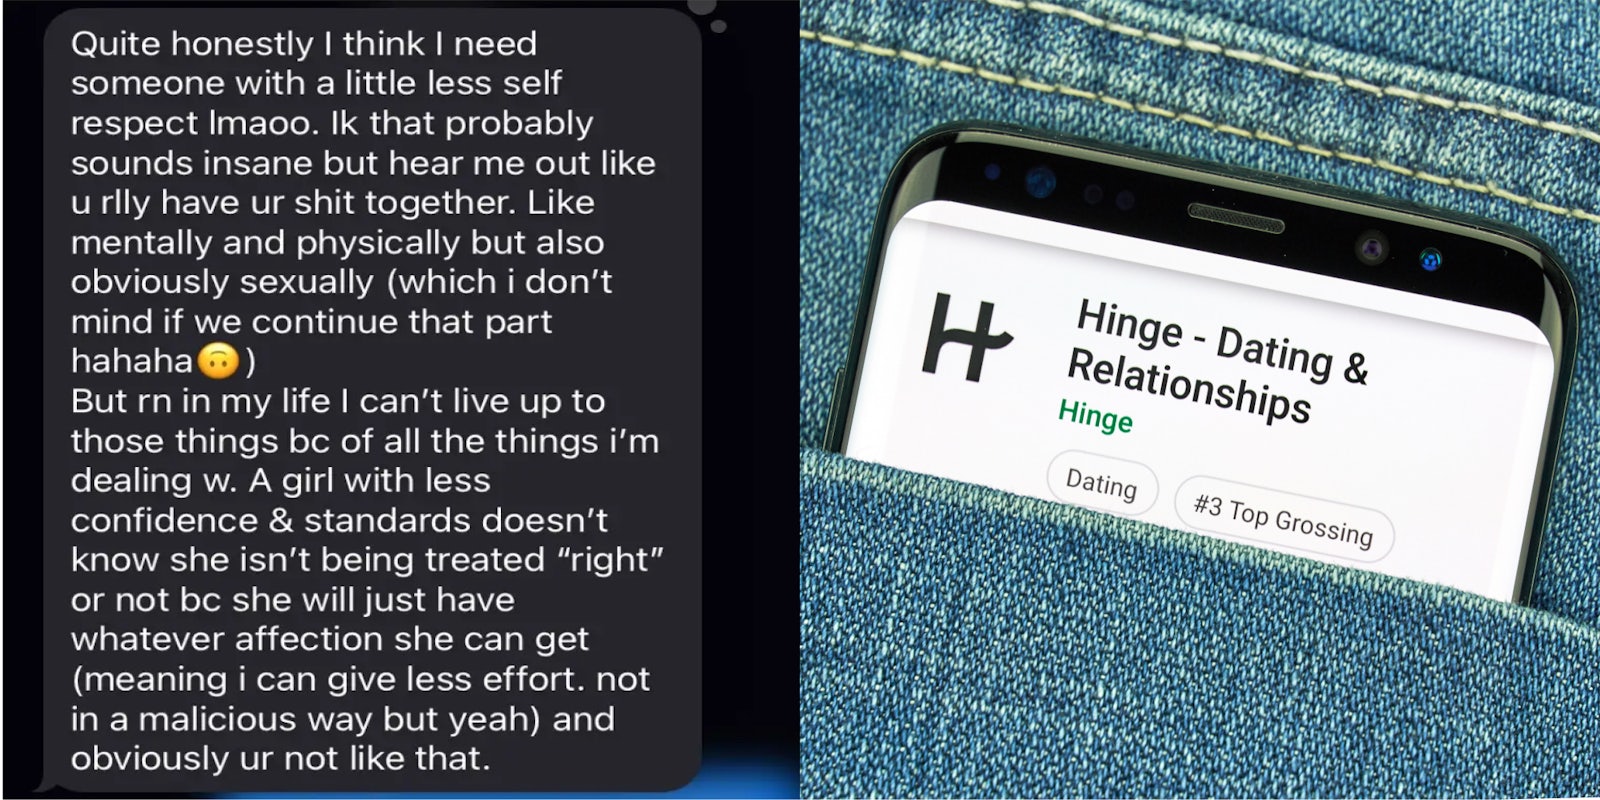 text message 'Quite honestly I think I need someone with a little less self respect...' (l) Hinge dating app on phone screen in jean pocket (r)